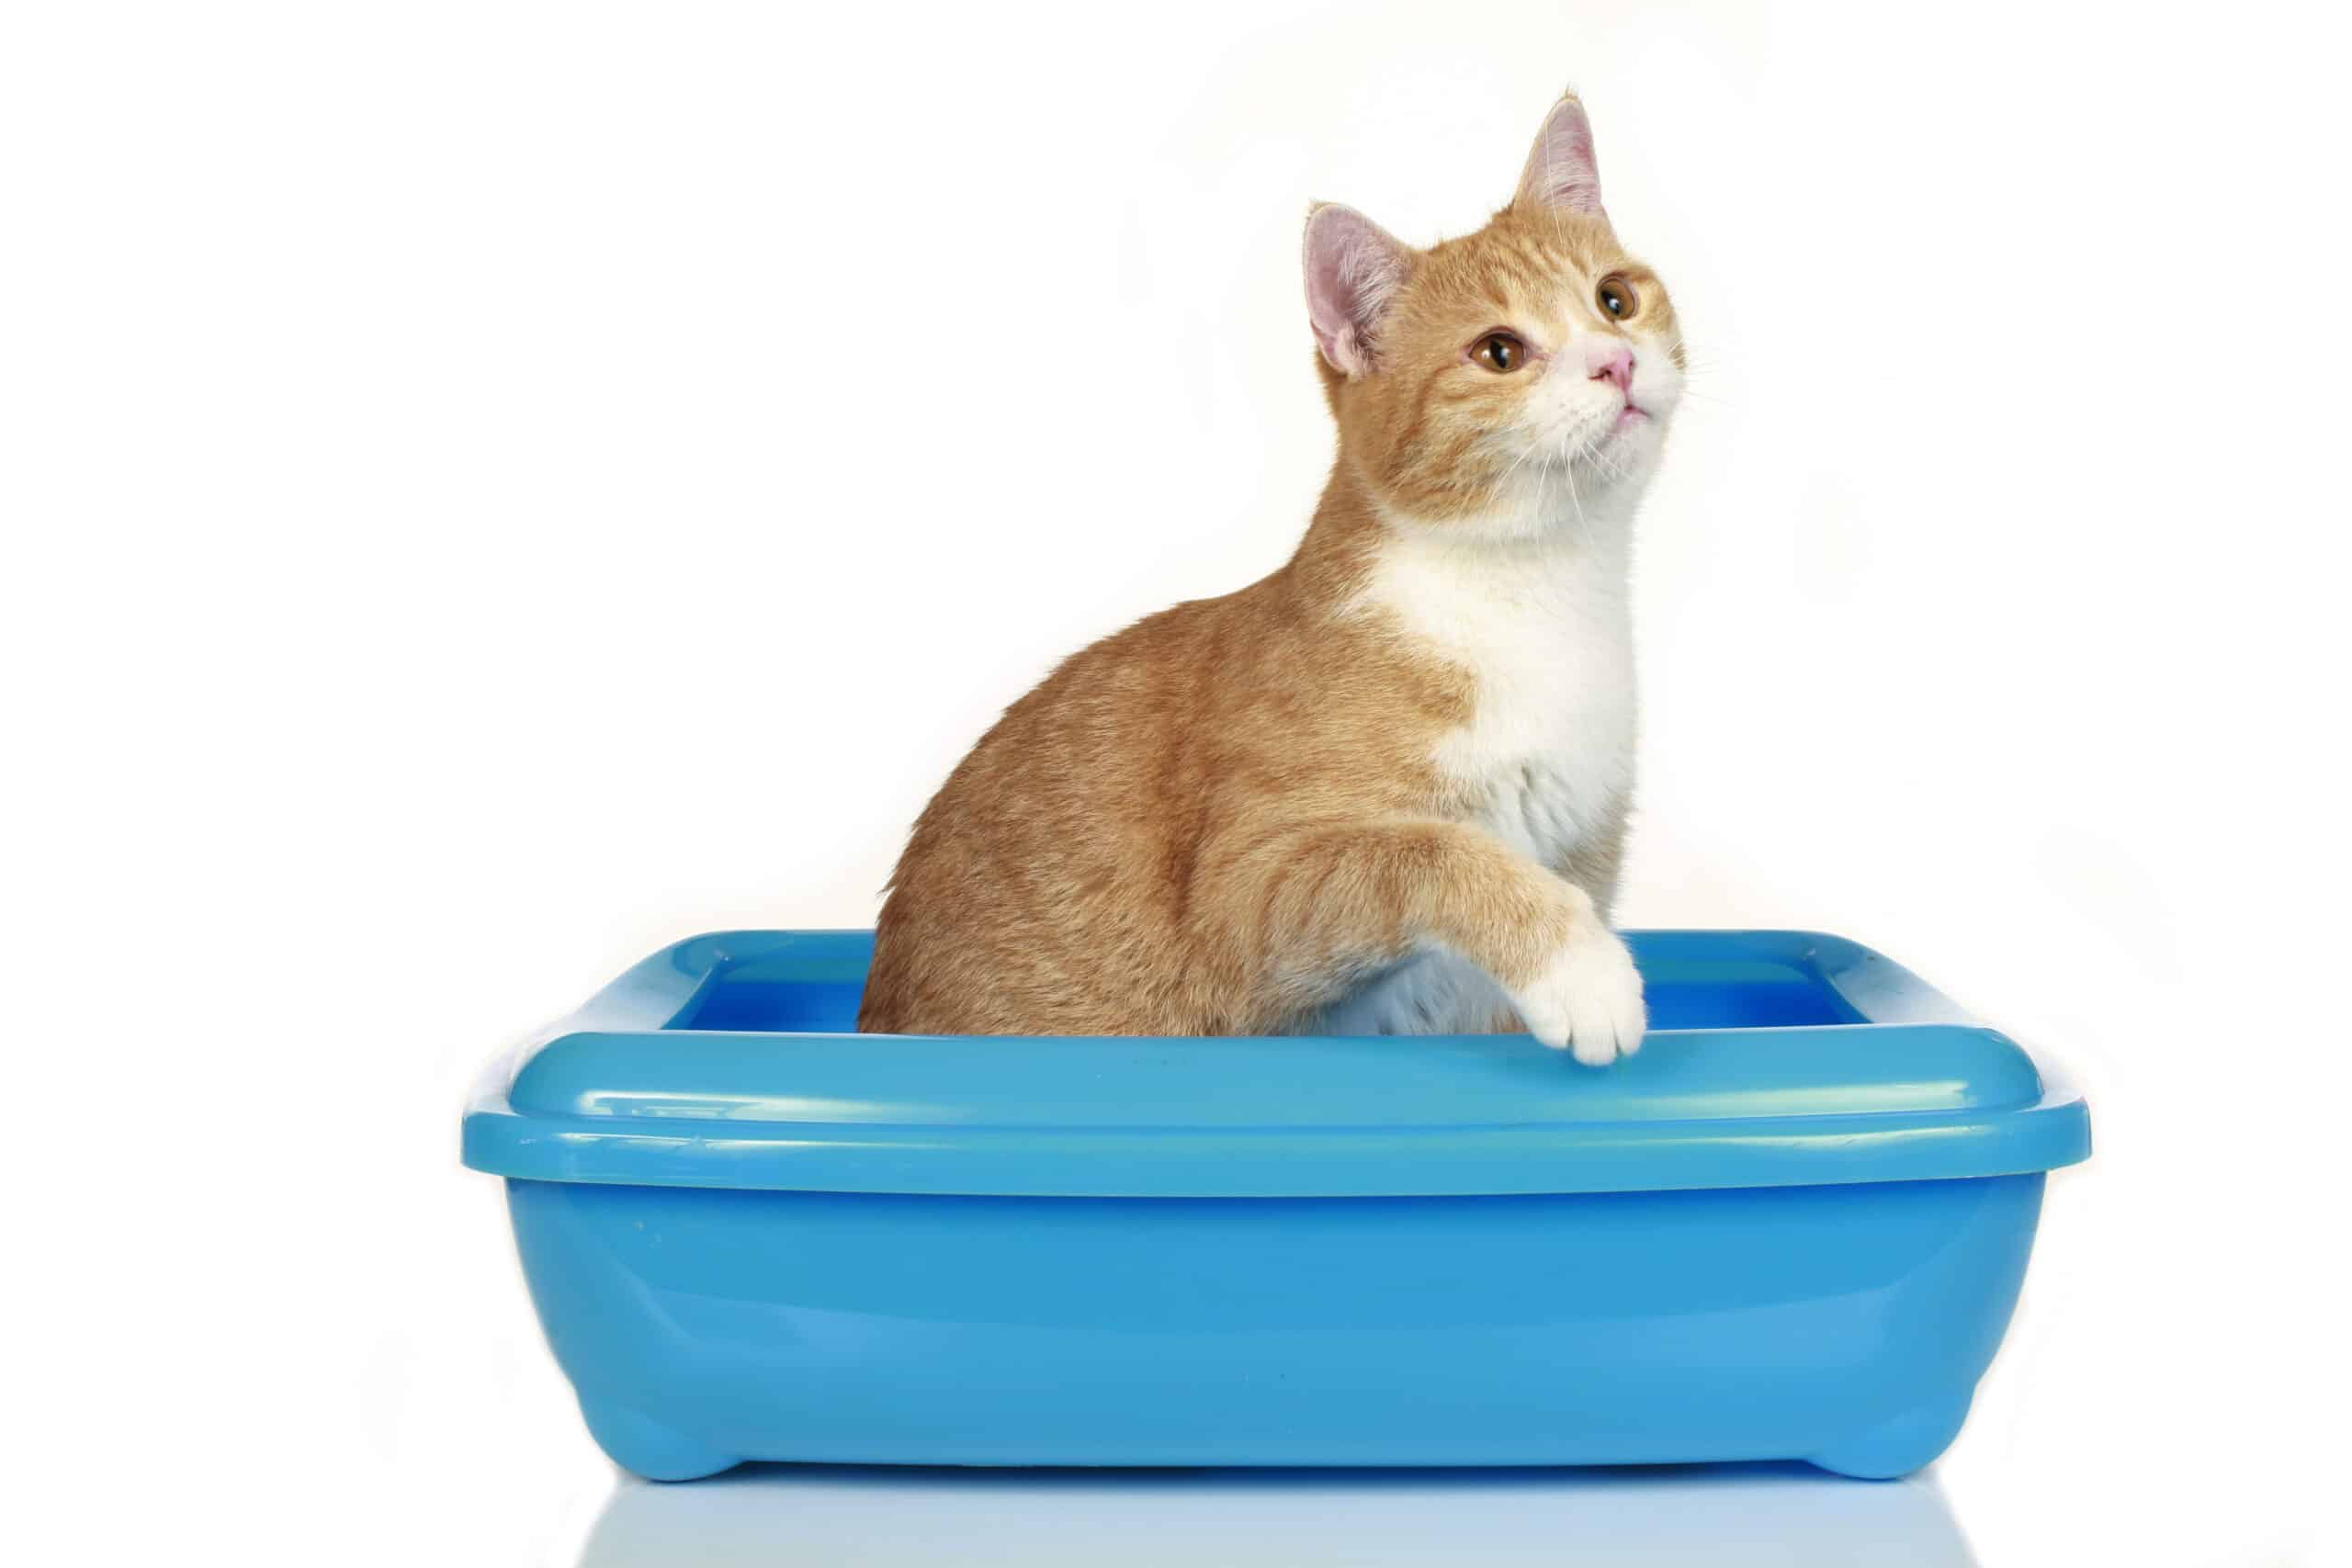 Why do cats poop outside the litter box